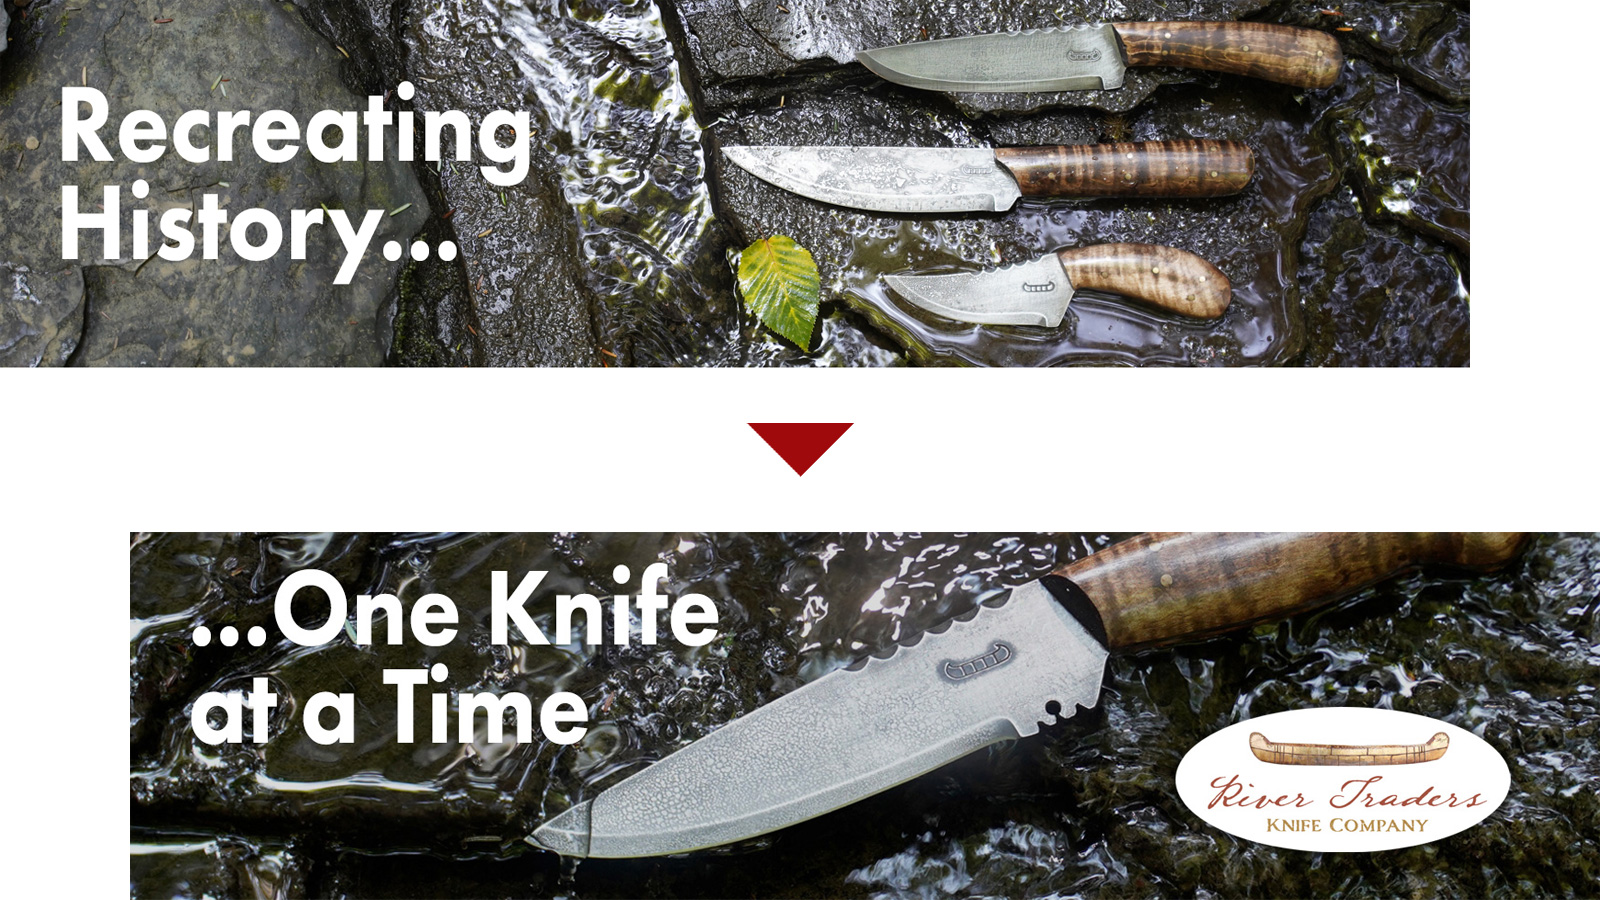 Website banners of Scandinavian knives photographed on shale in shallow water